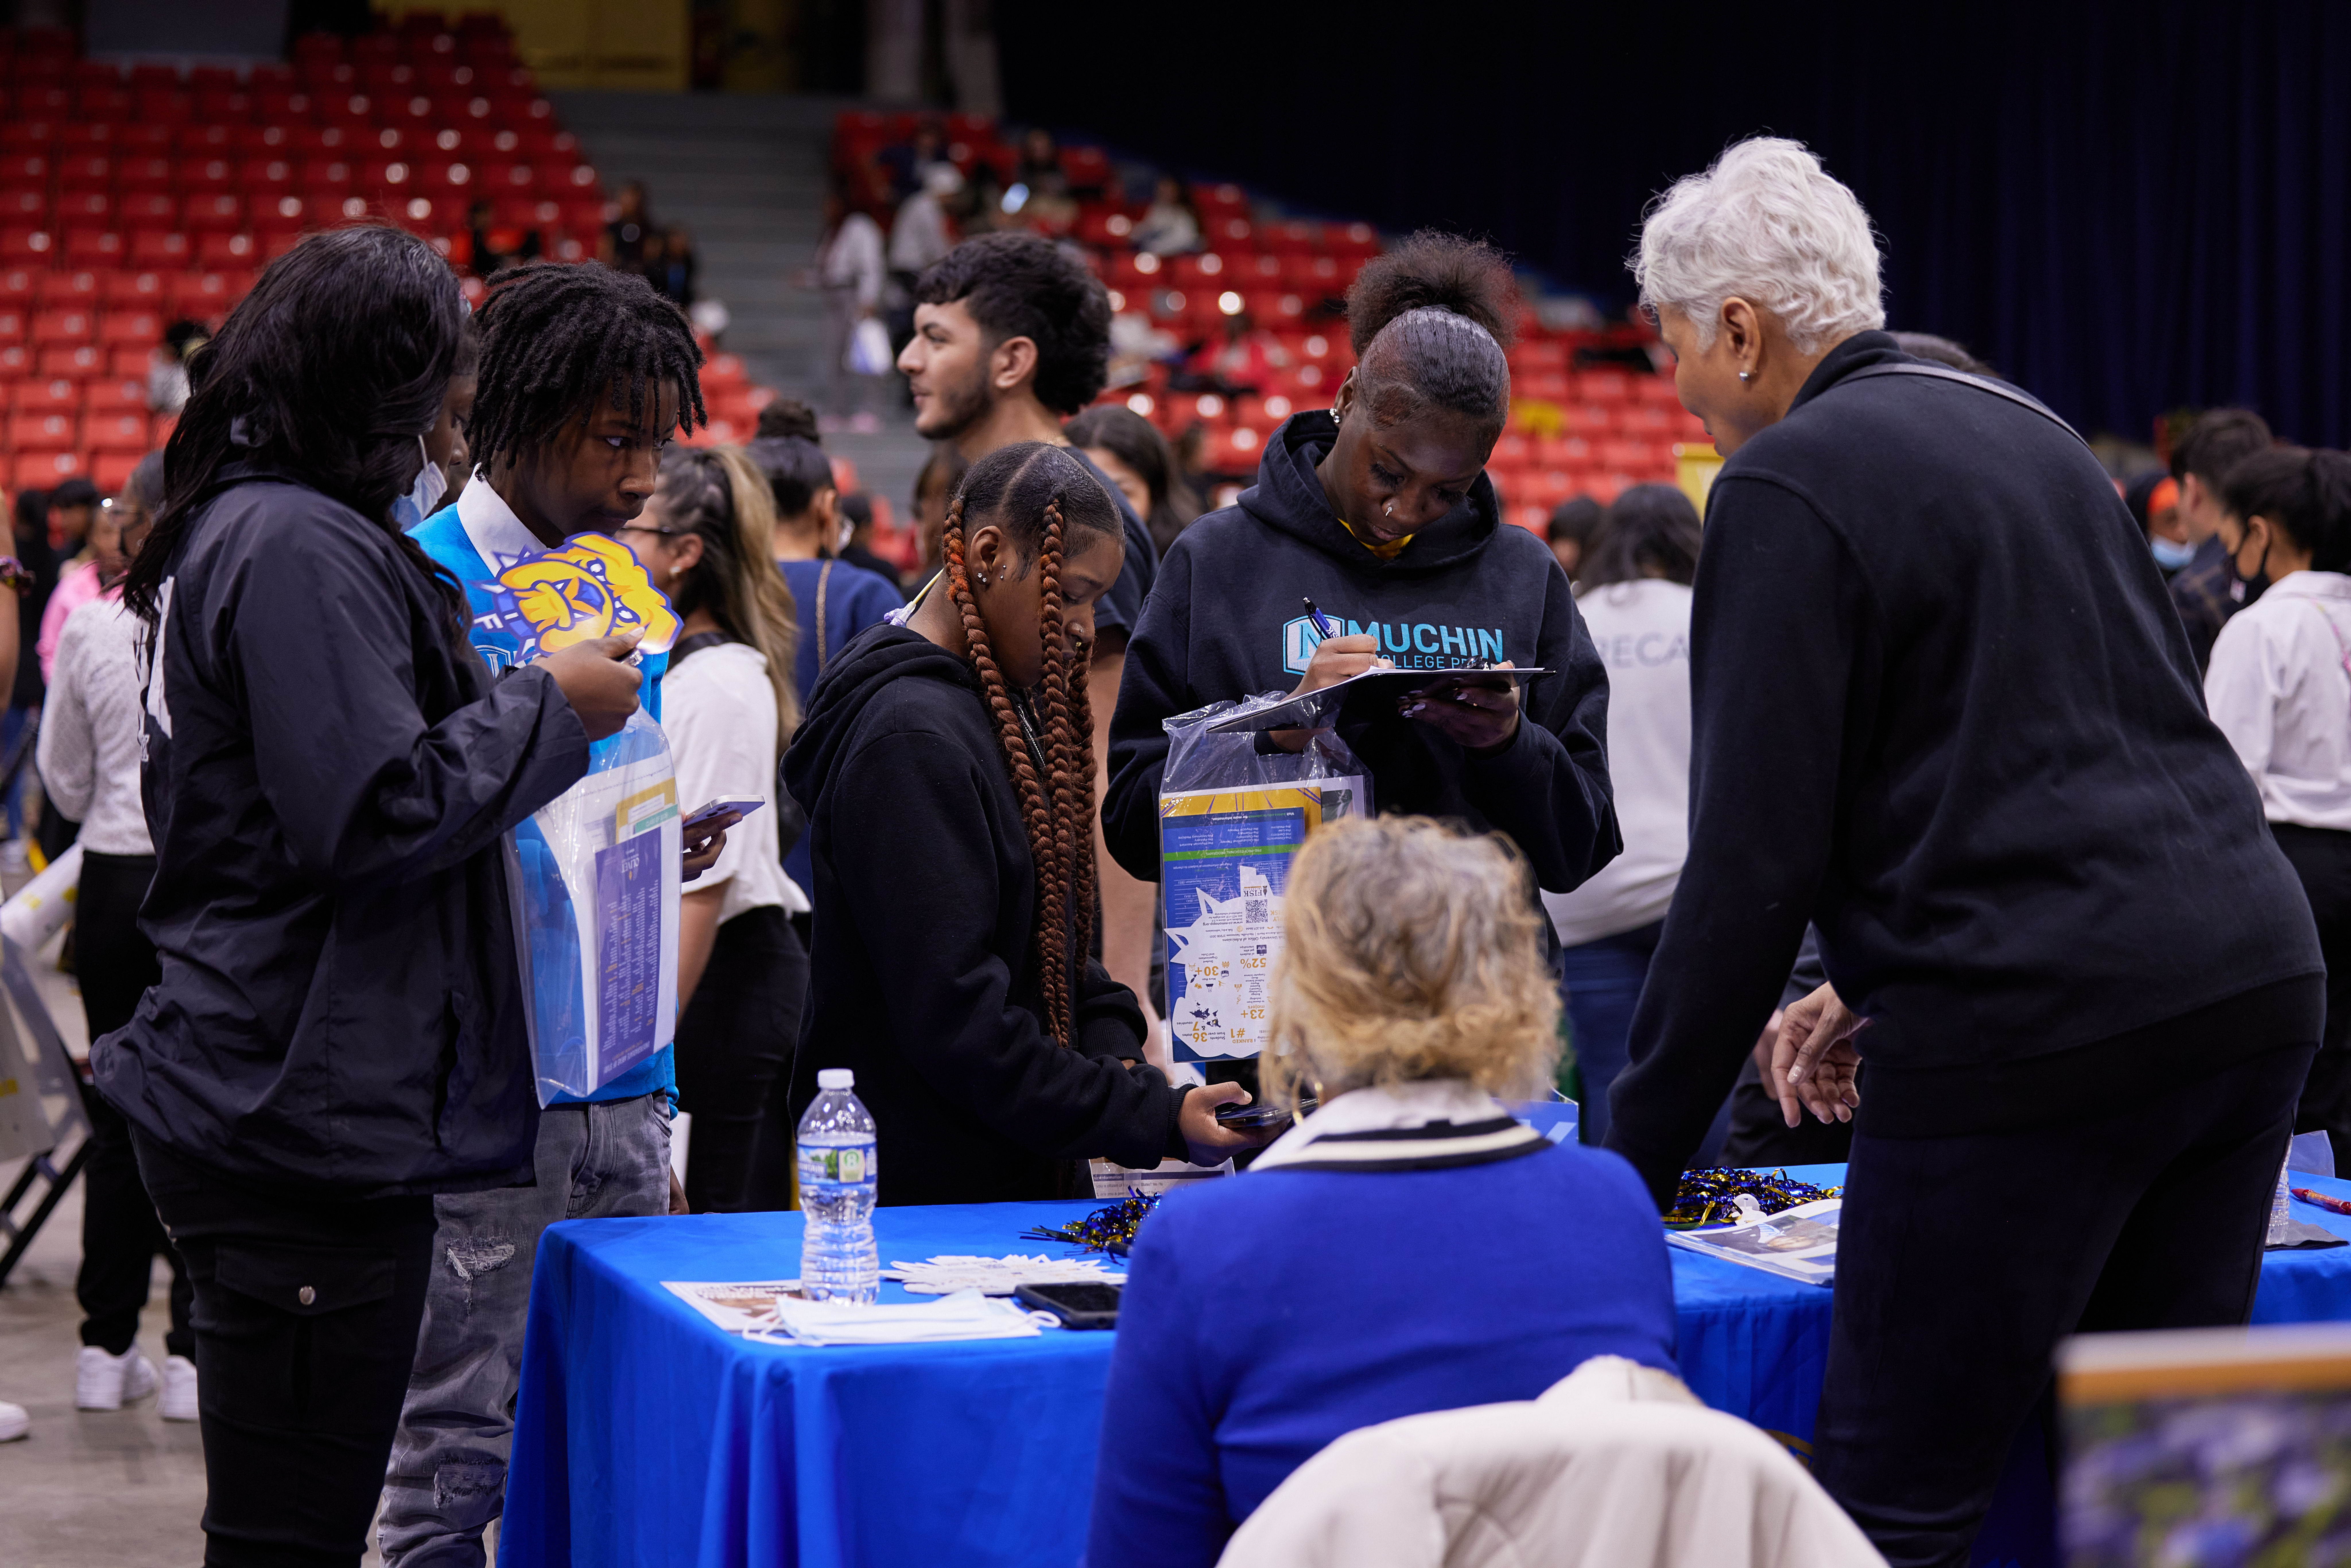 Photo shows a scene at the Noble Schools' College Fair at UIC's Credit One Arena. Two older Black women sit behind the Fisk University booth, which has a bright blue tablecloth. Several Black students from different Noble Schools stand in front of them, listening to them talk and looking at pamphlets and other materials on the table.